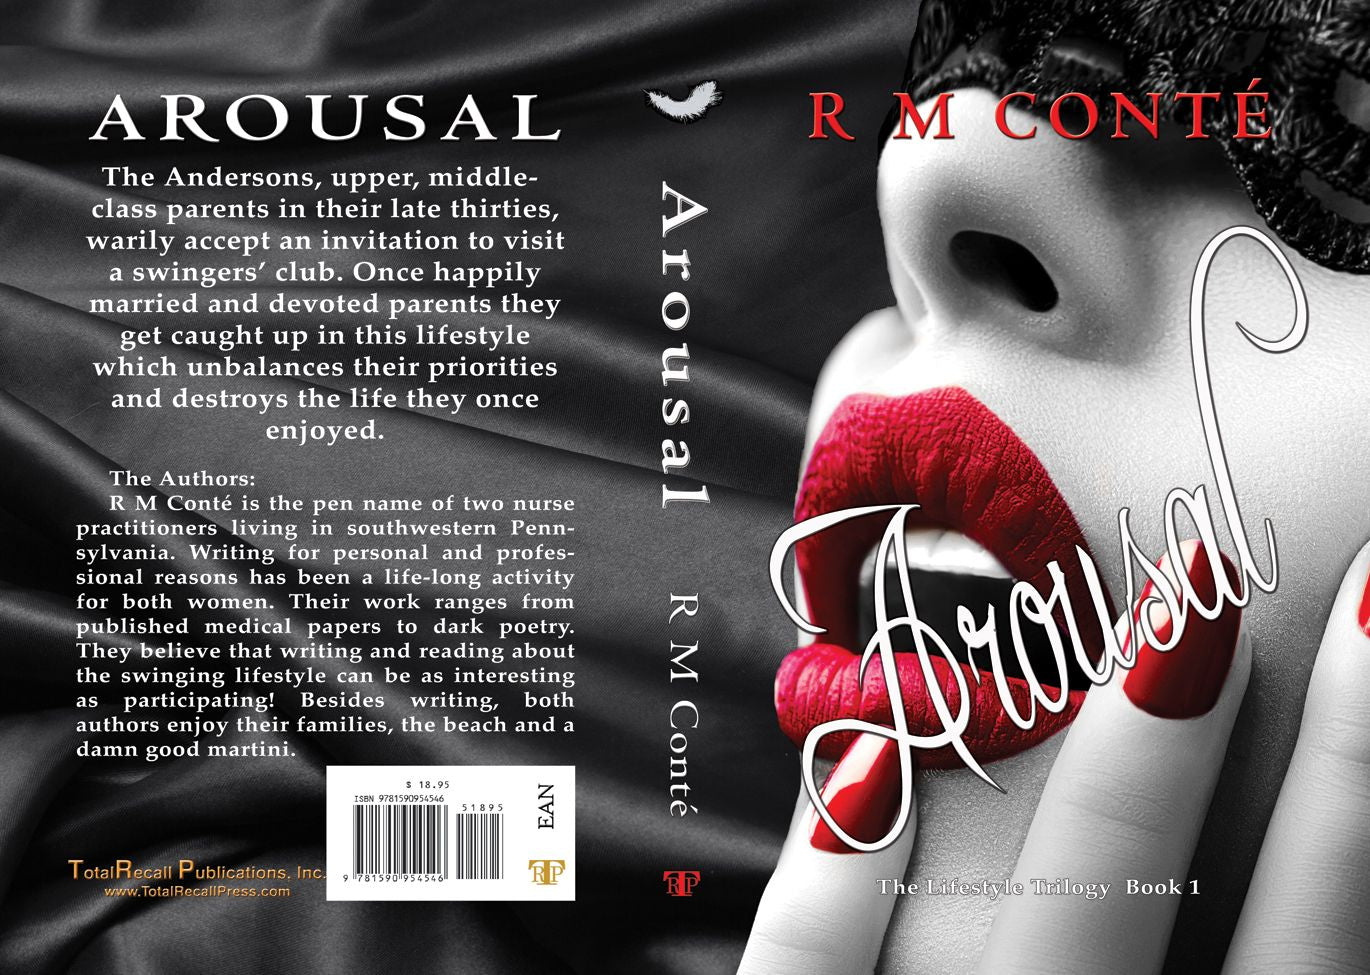 TaleFlick Marketplace AROUSAL (The Lifestyle Trilogy Book 1) by R M Conté photo pic